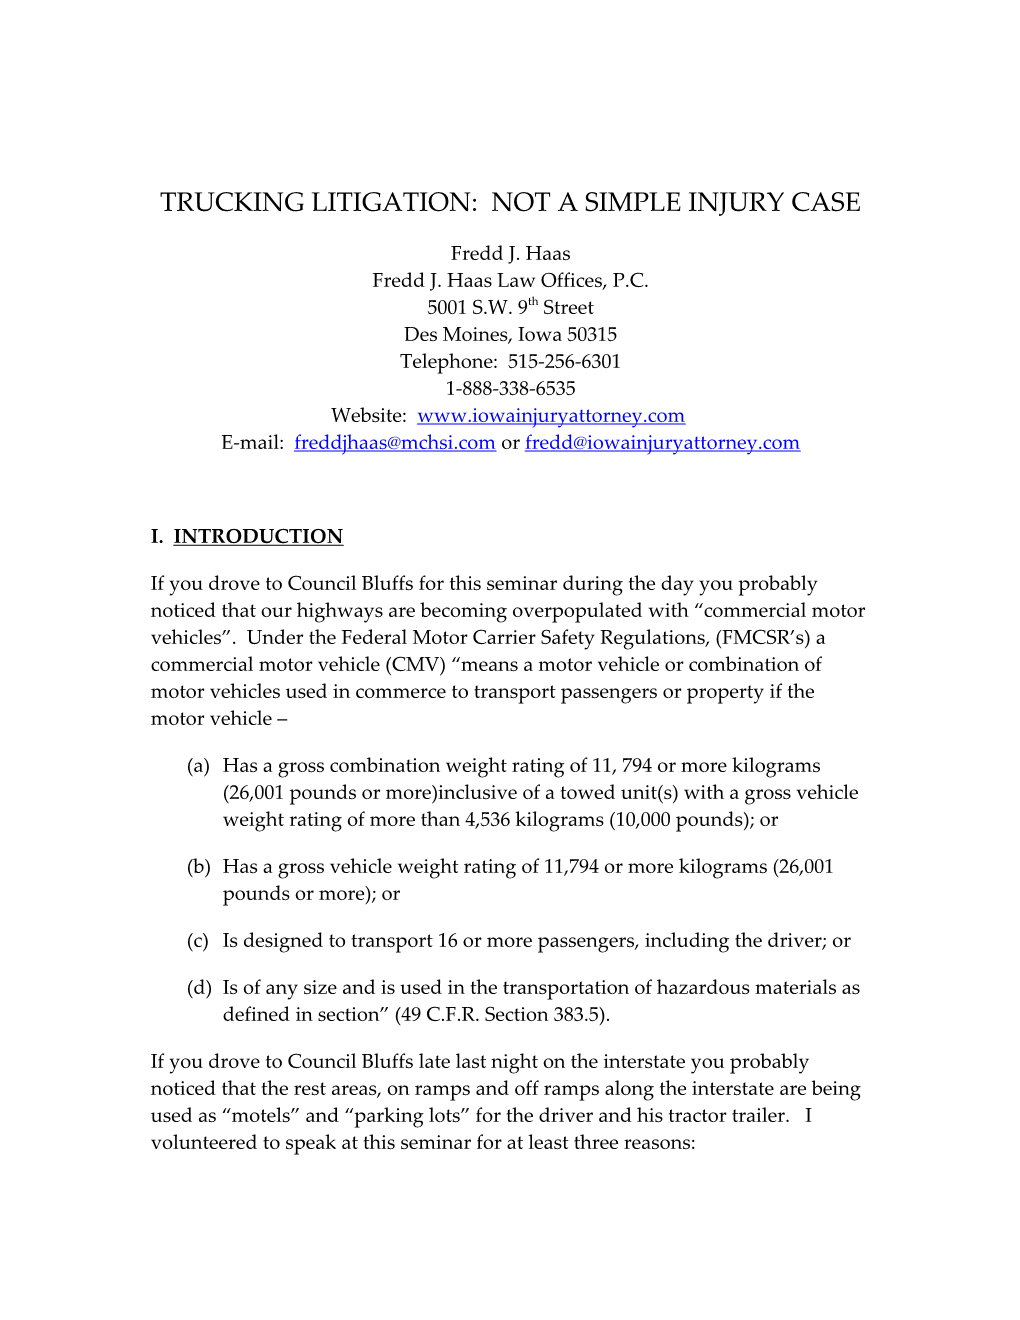 Trucking Litigation: Not a Simple Injury Case